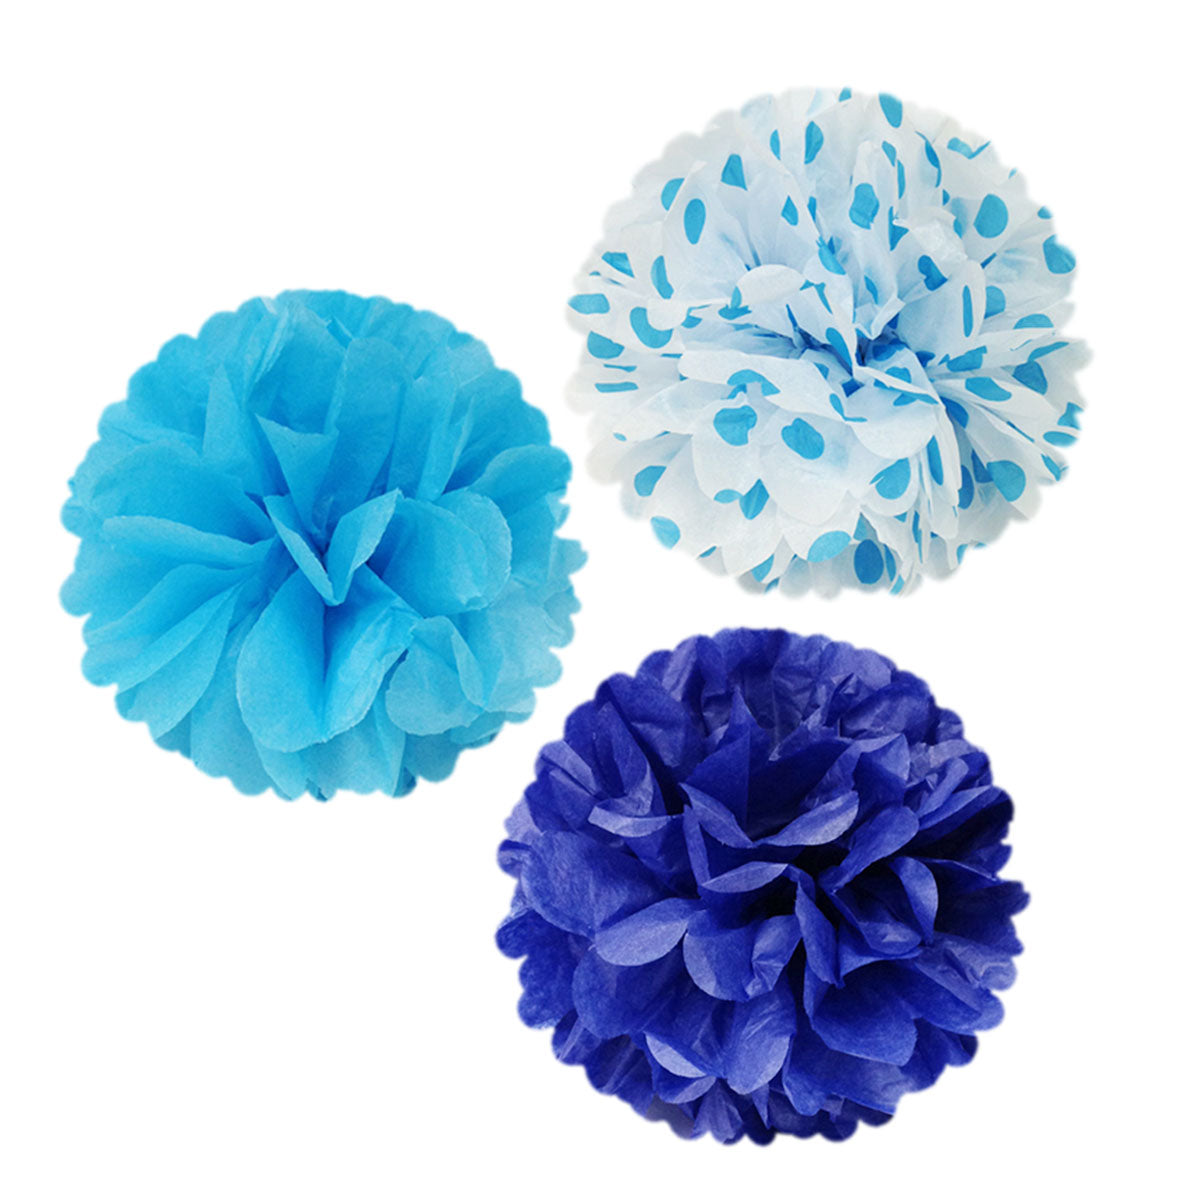 Wrapables 12 inch Set of 3 Tissue Pom Poms Party Decorations for Weddings, Birthday Parties Baby Showers and Nursery Dcor, Blue/ Navy/ Blue Polka Dots